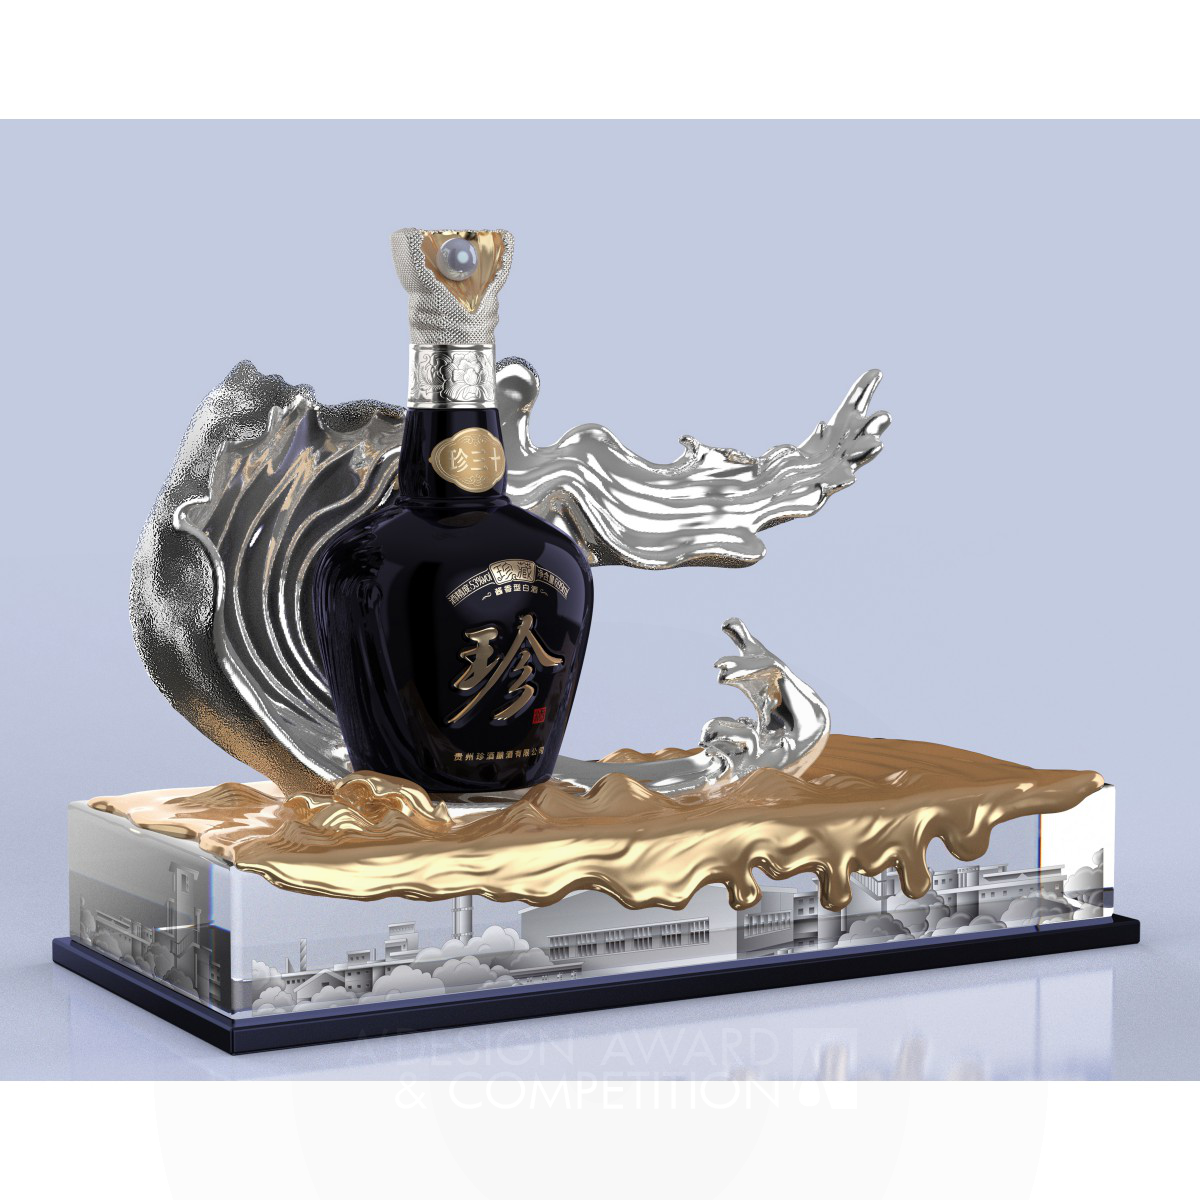 Ying Song Brand Design Co., Ltd wins Silver at the prestigious A' Packaging Design Award with Zhenjiu Zhencang Chinese Baijiu Packages With Display.